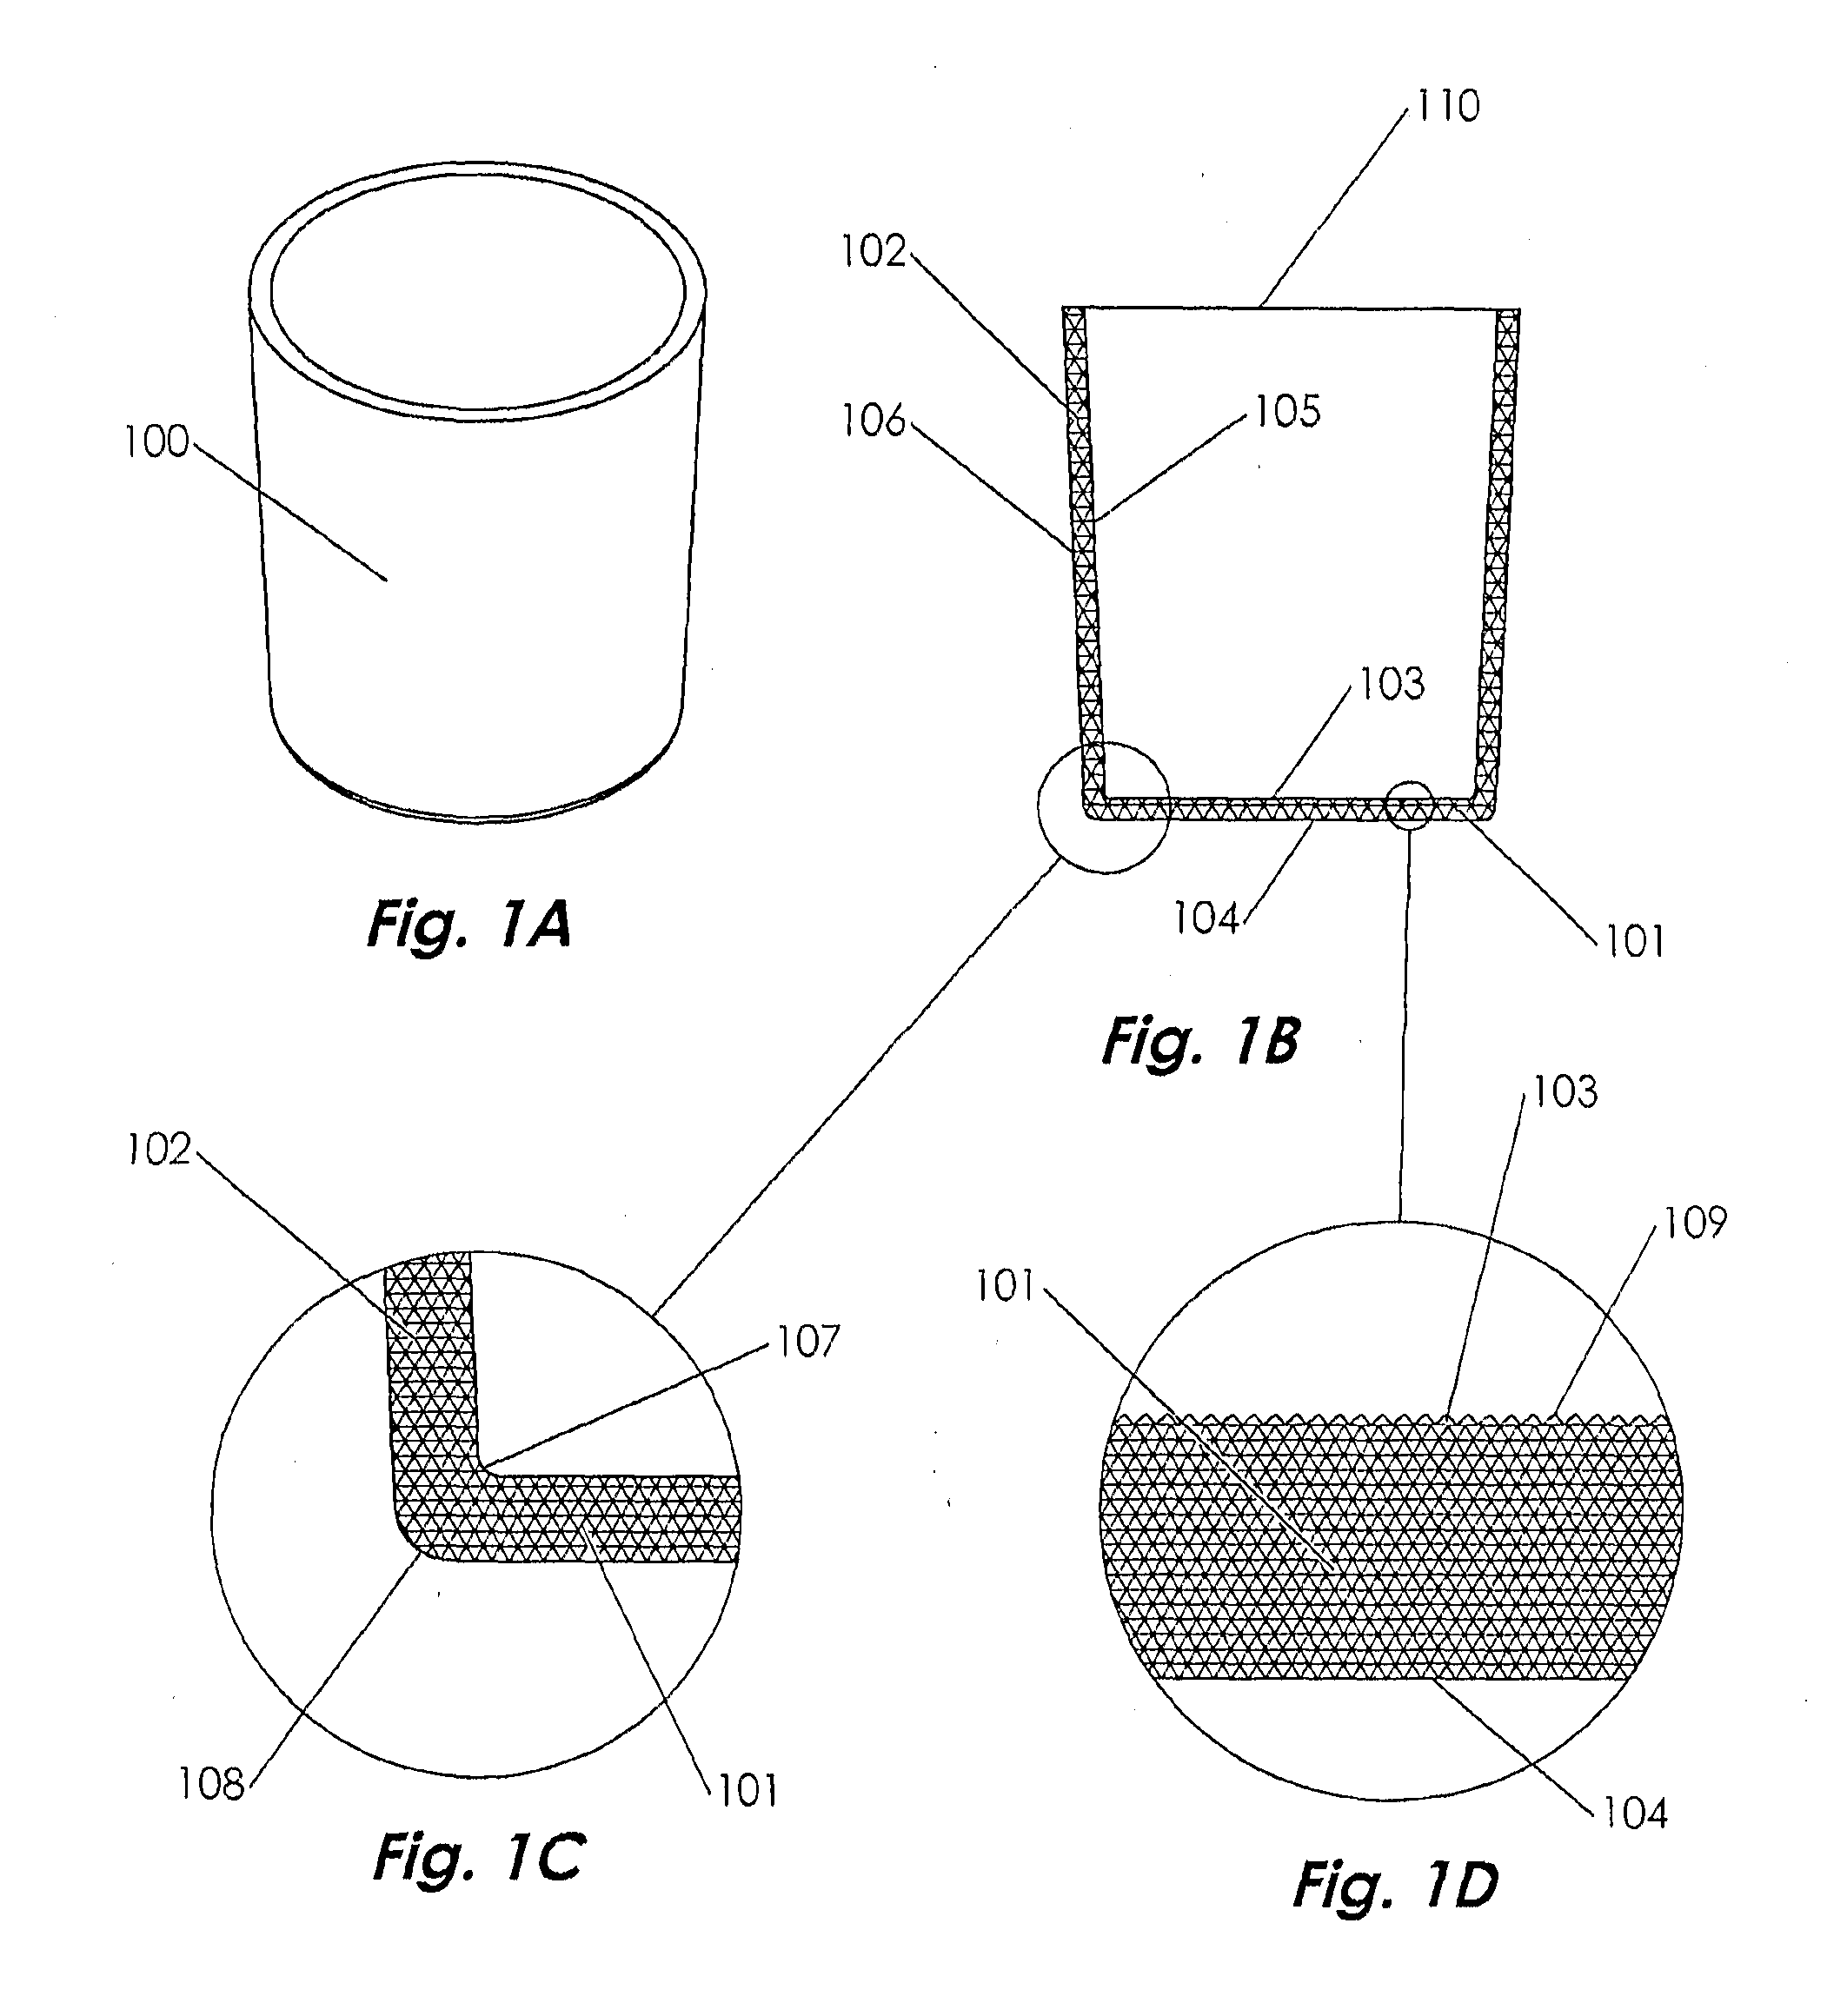 Cell culture apparatus and associated methods